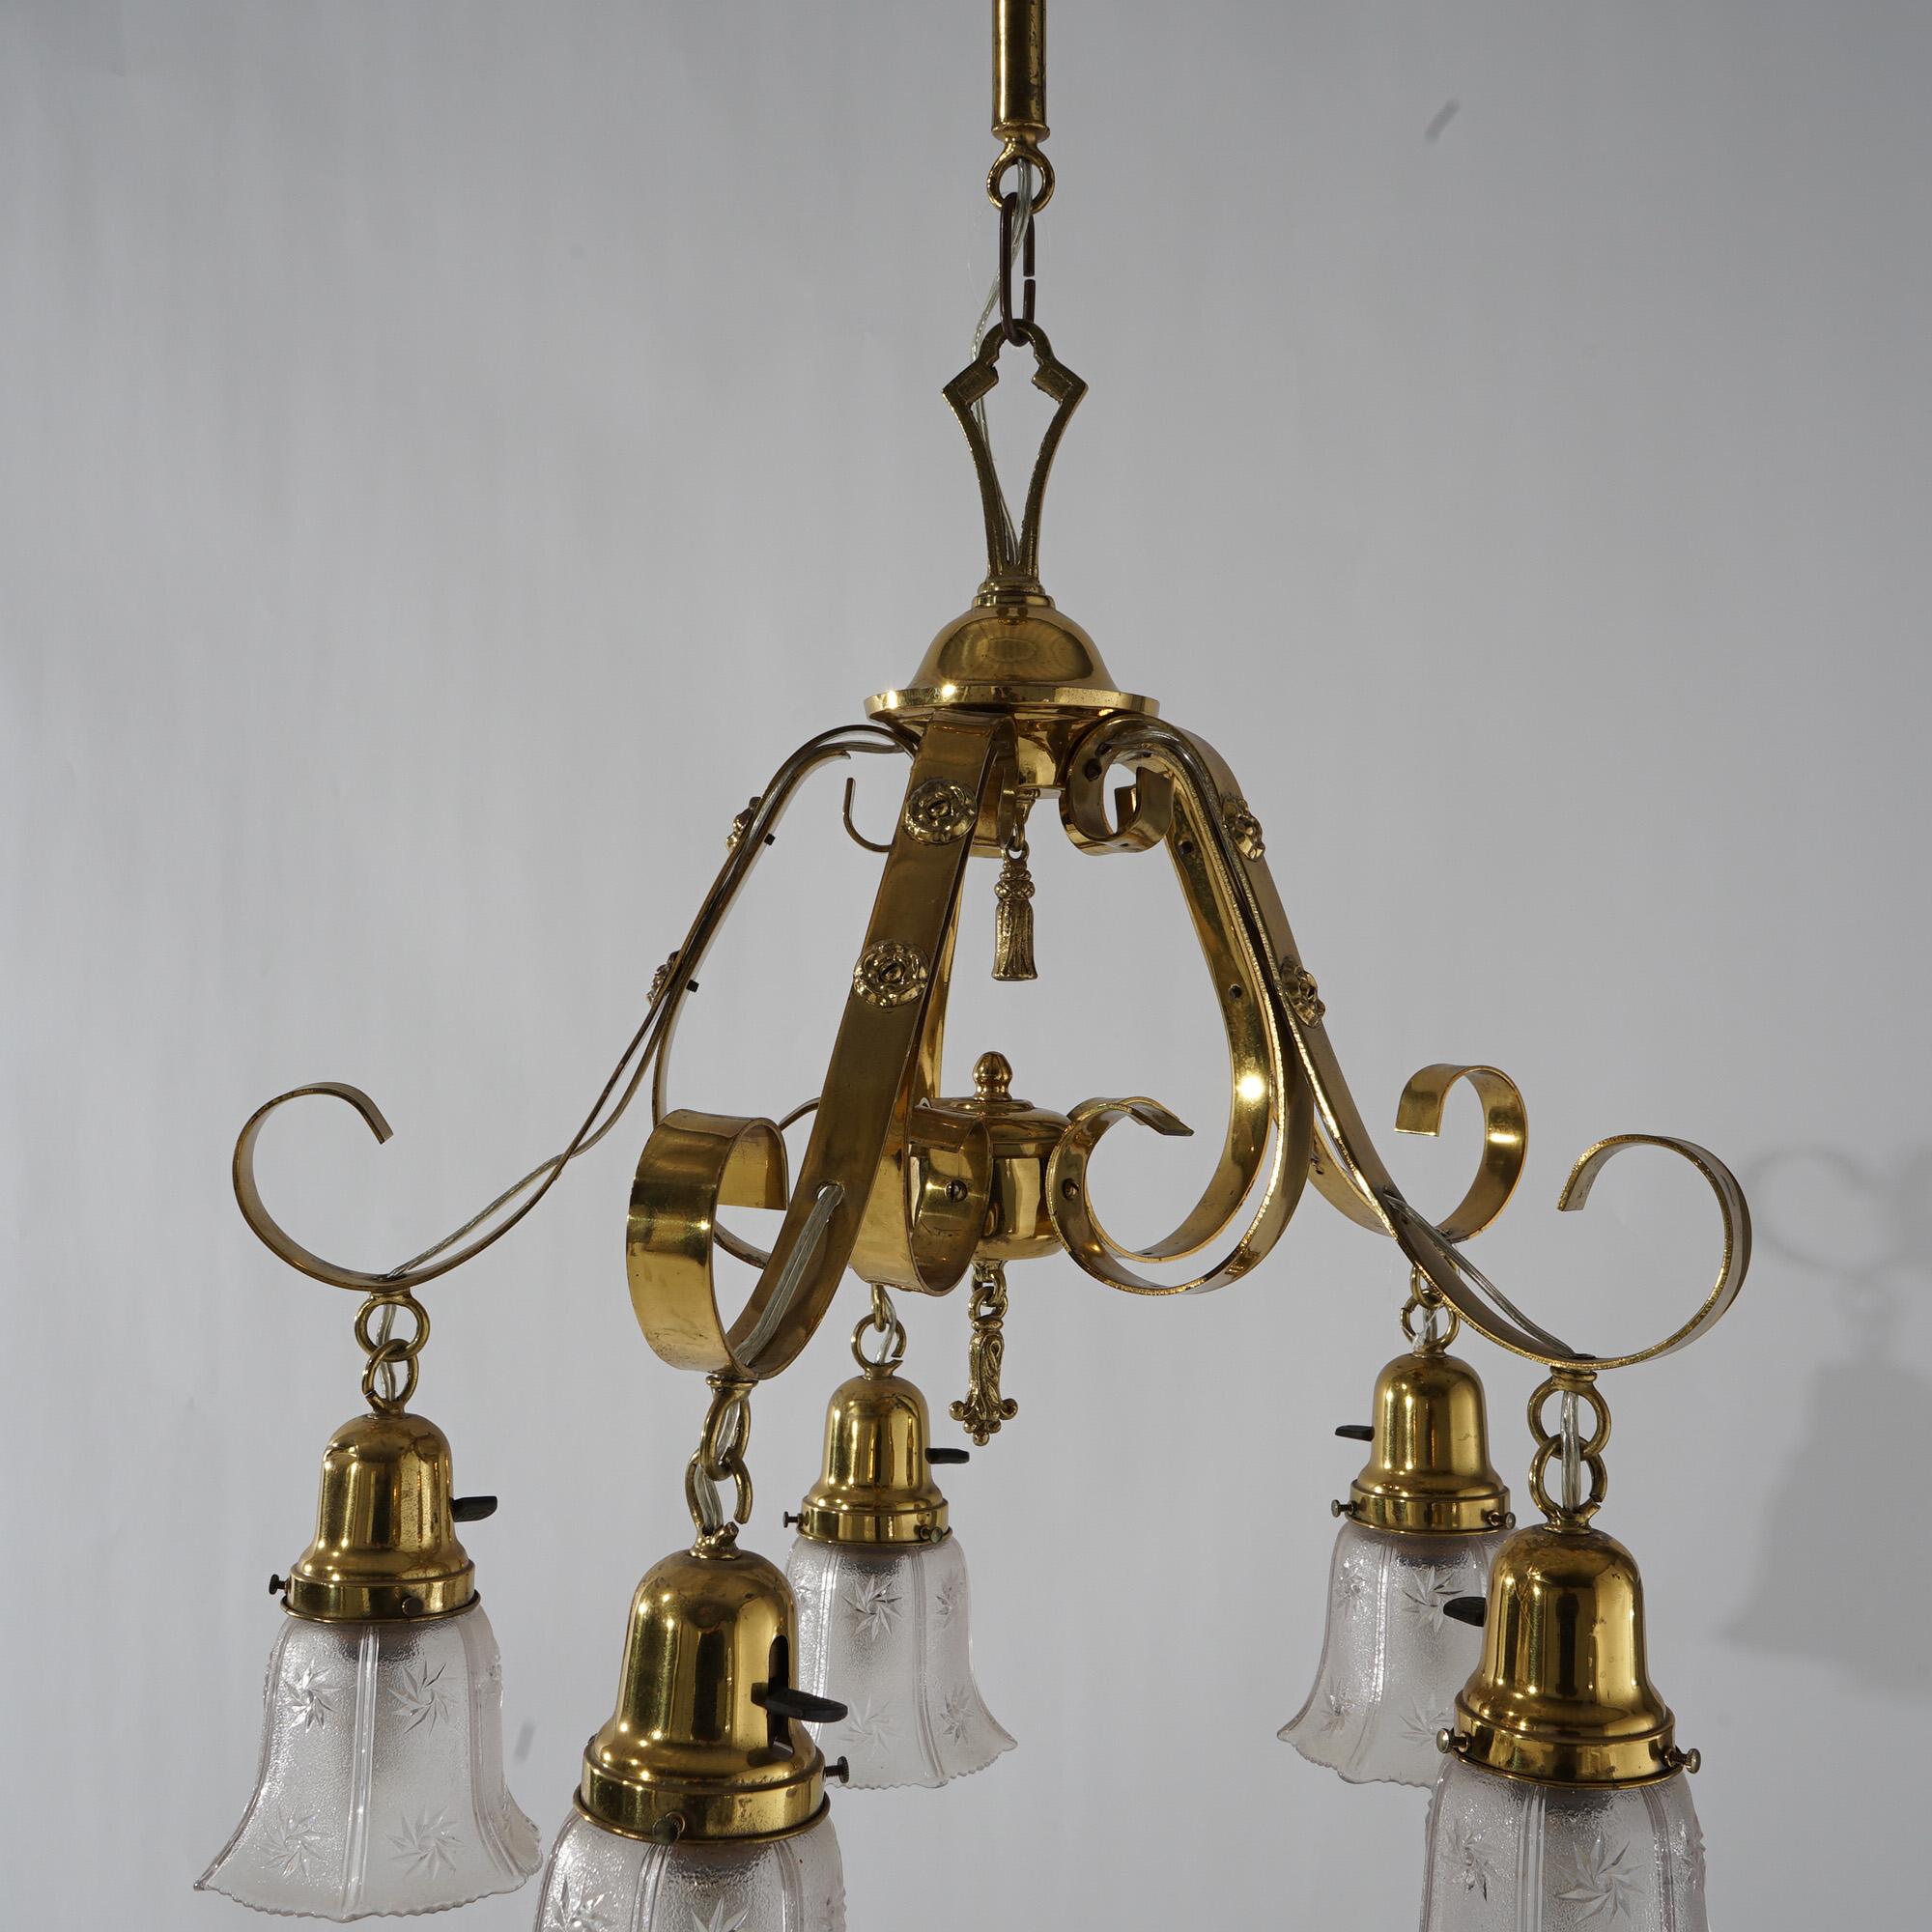 Antique Arts & Crafts Gilt Metal & Brass Hanging Fixture, Embossed Shades c1920 For Sale 4